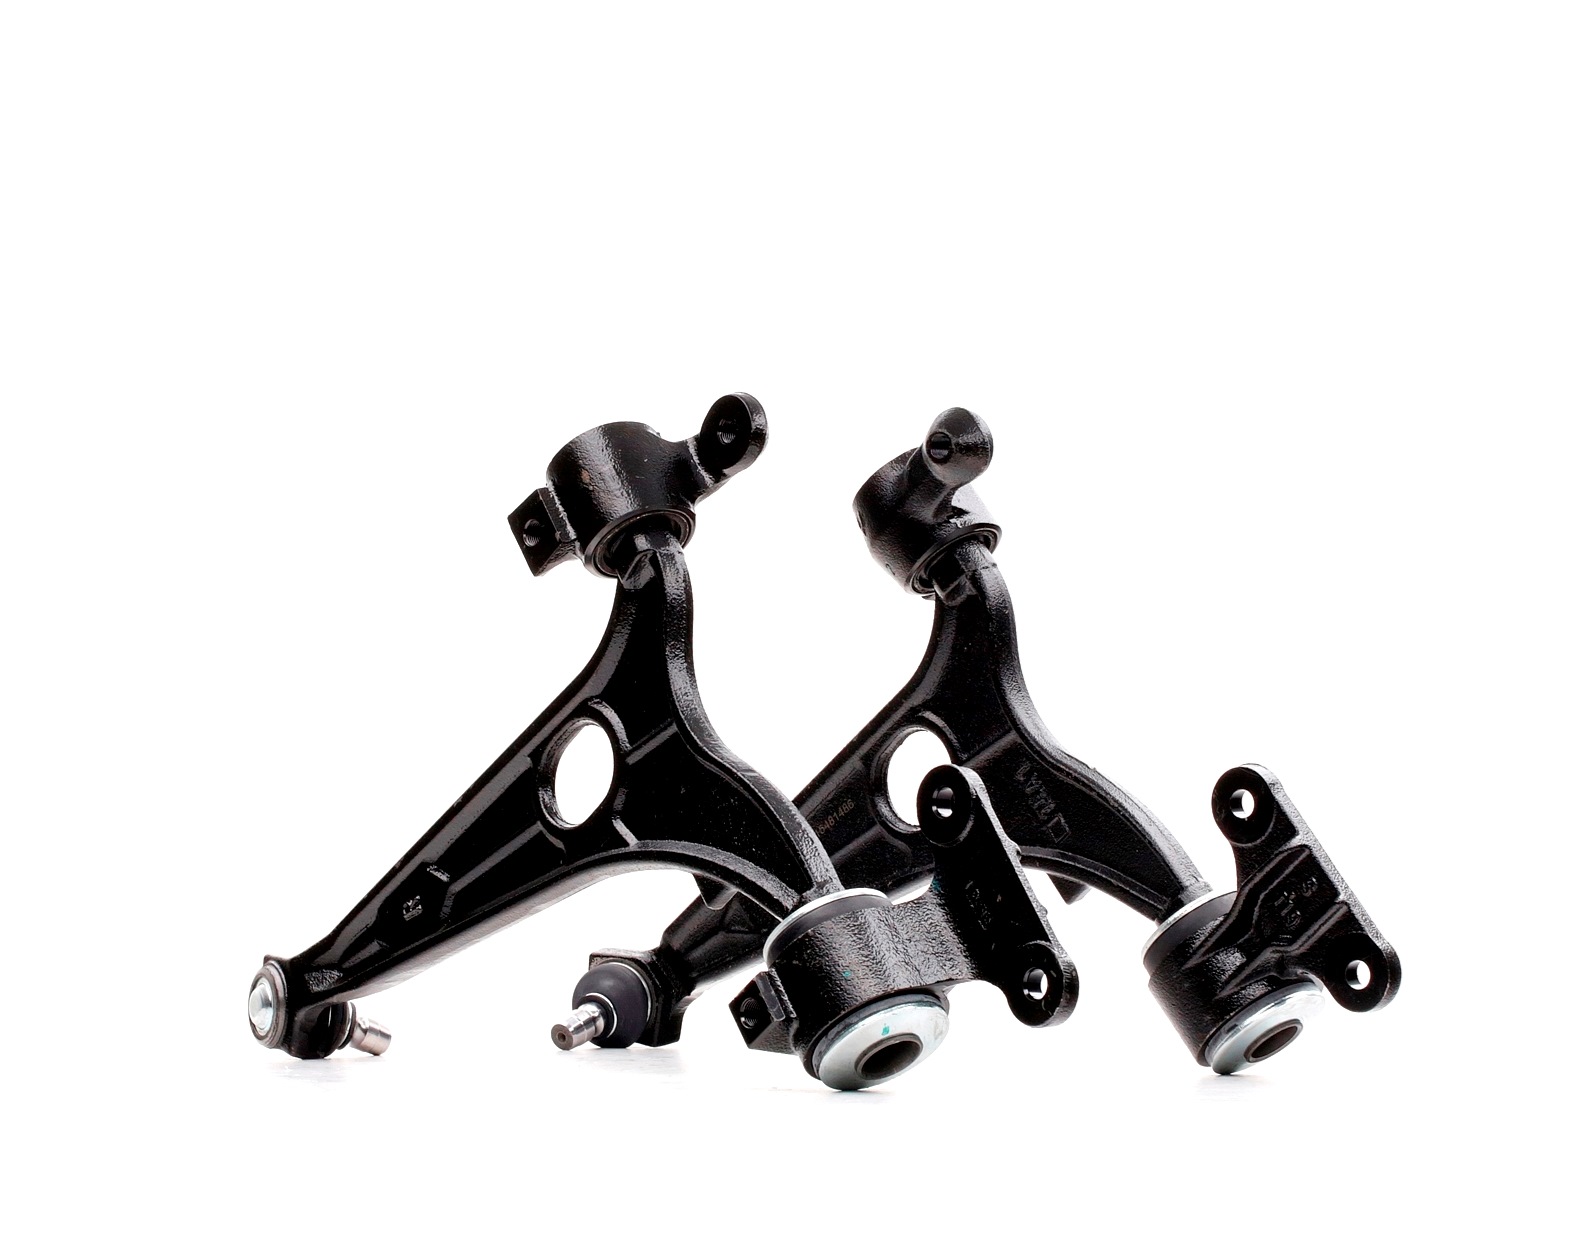 SKSSK-1600200 STARK Suspension upgrade kit FIAT Control Arm, Front axle both sides, Lower